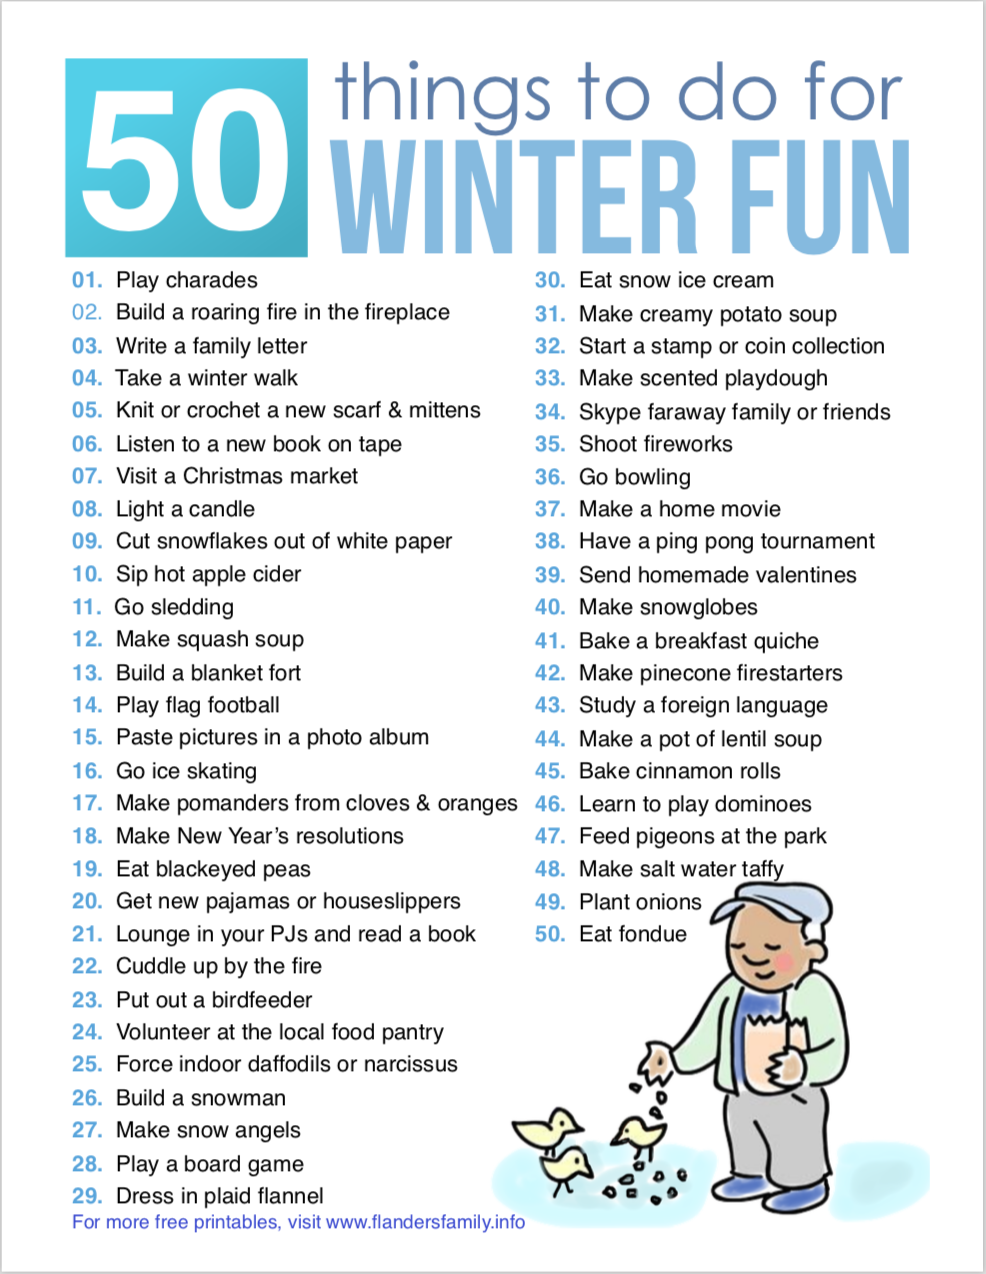 50 Things to Do for Winter Fun